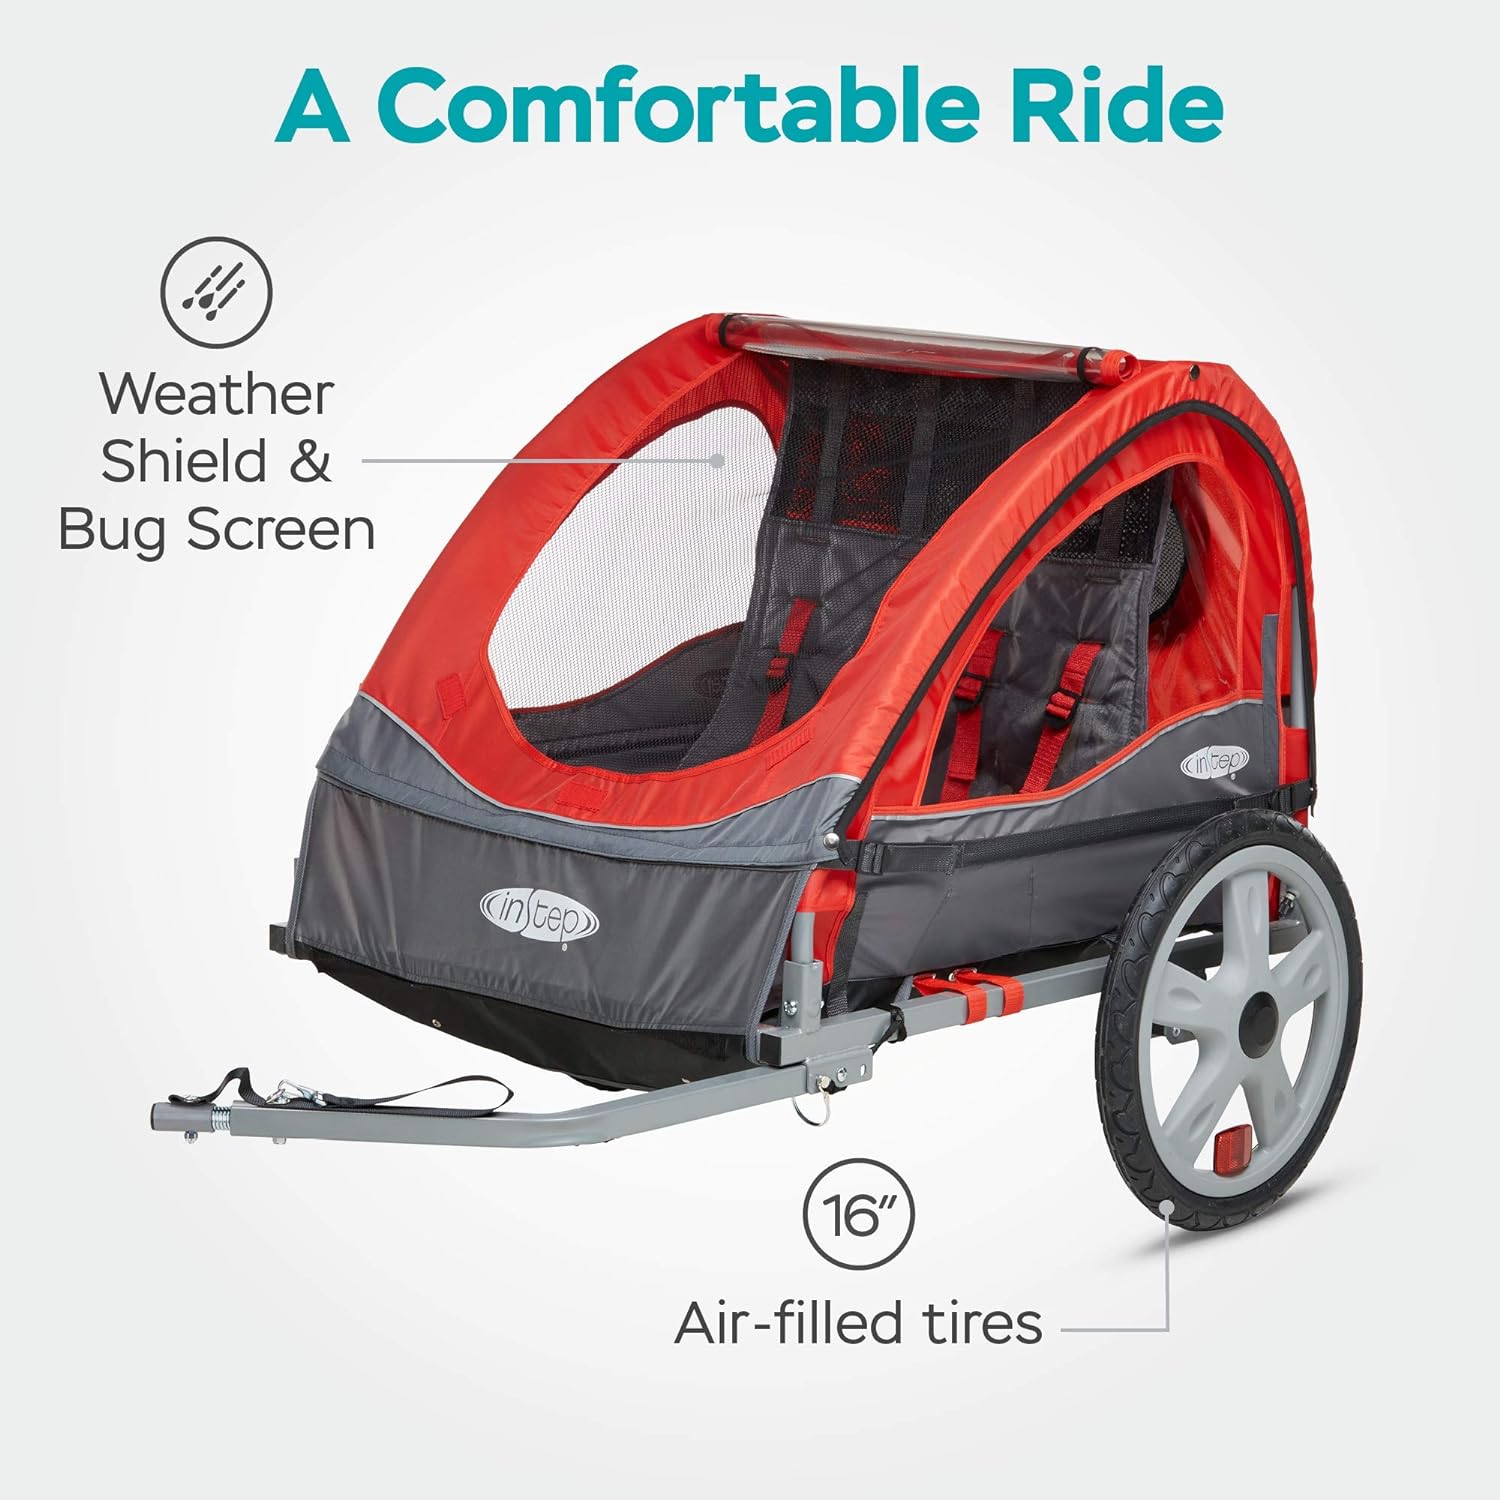 Take 2 Bike Trailer for Kids with 5-Point Harness, Folding Frame, Quick Release Wheels, Bug Screen & Weather Shield